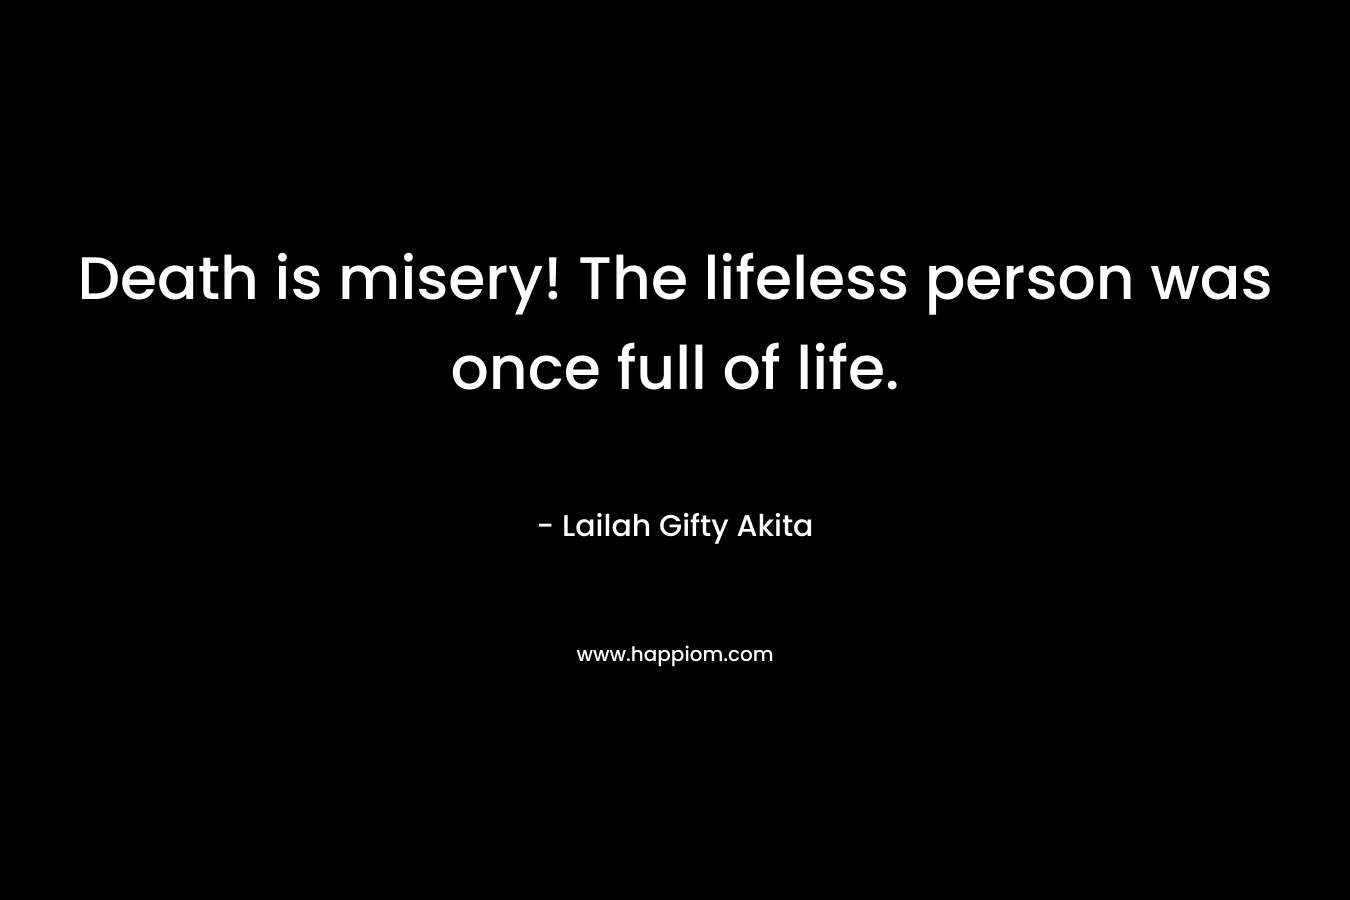 Death is misery! The lifeless person was once full of life.